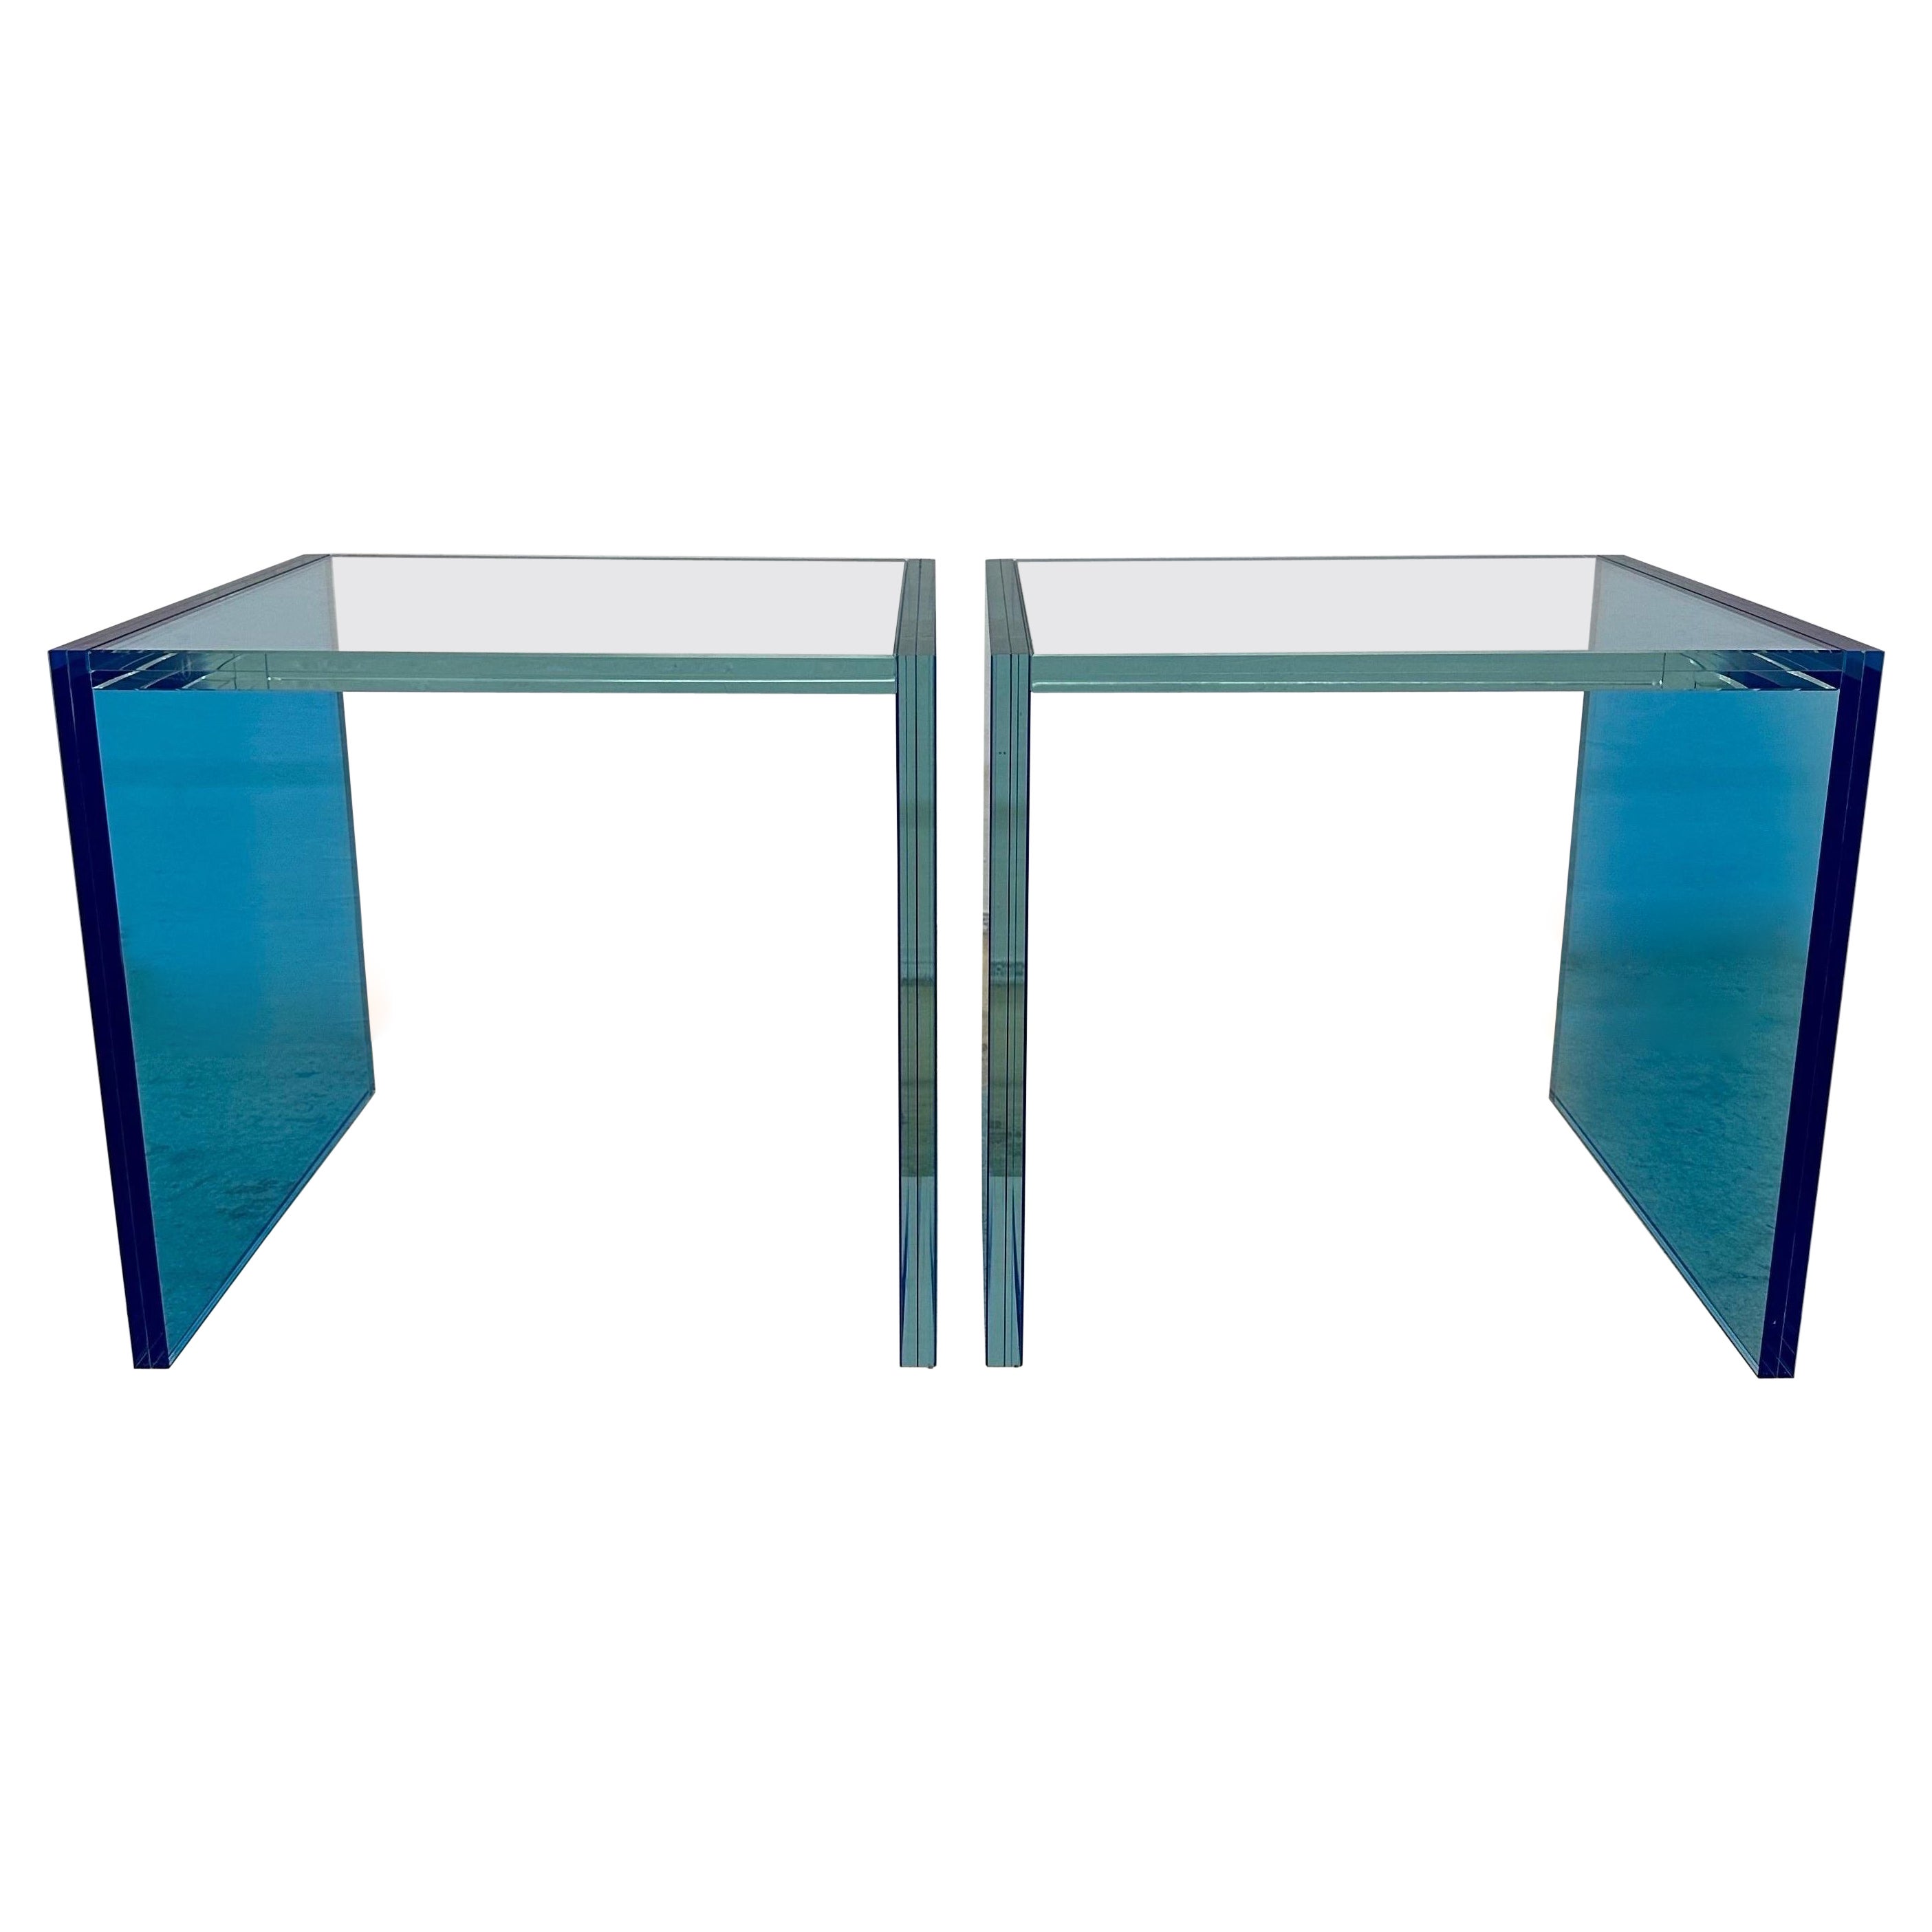 Santambrogio Milano Architectural Blue Glass Side Tables - 2022 - a Pair For Sale